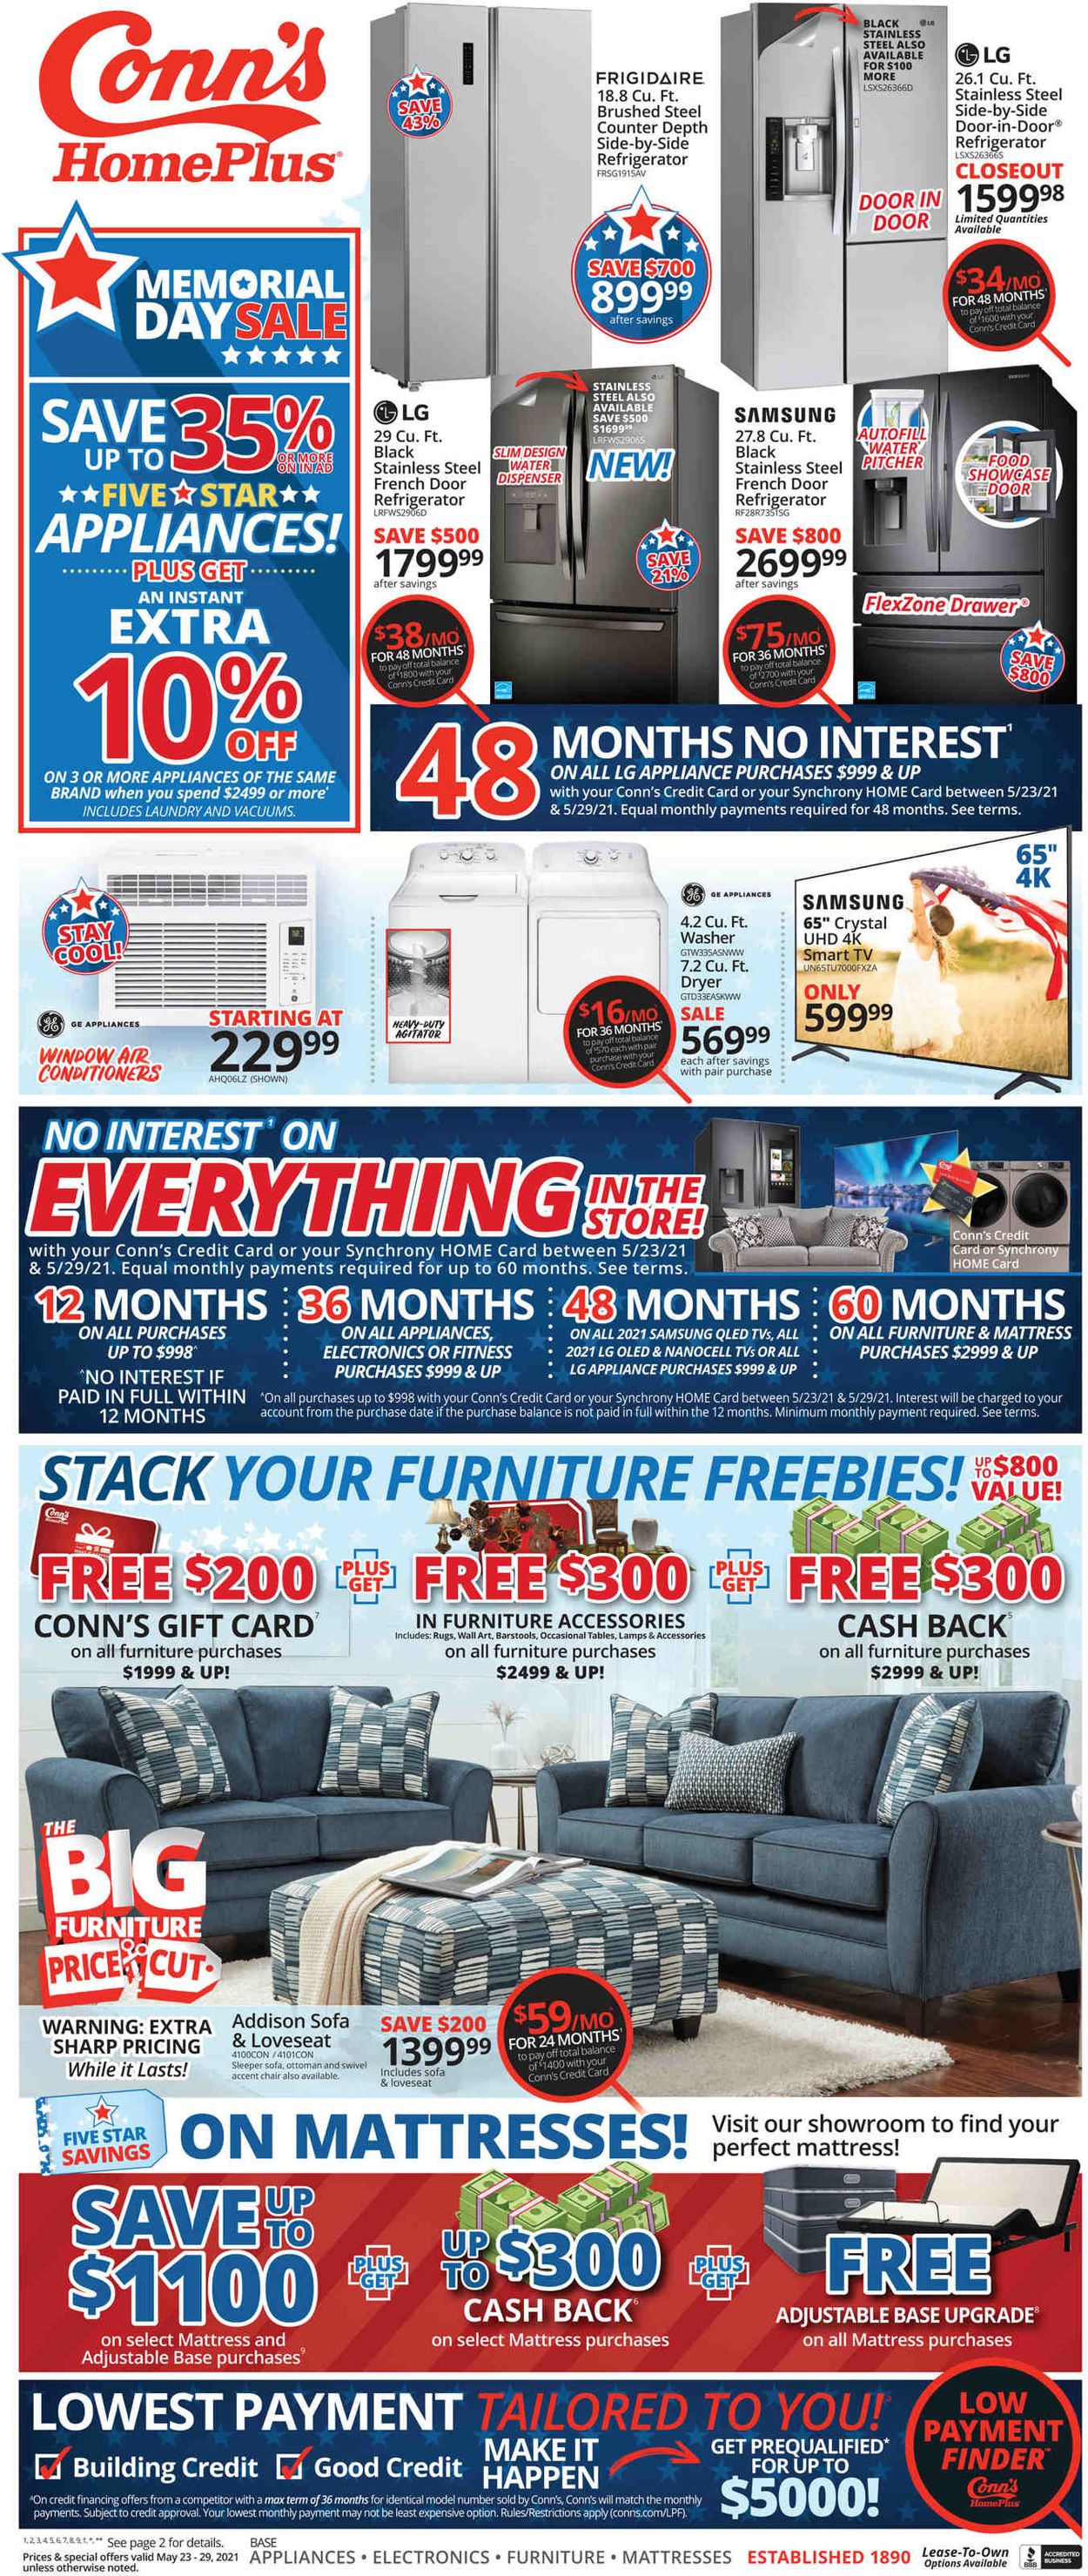 Conn's Home Plus Weekly Ad Circular - valid 05/23-05/29/2021